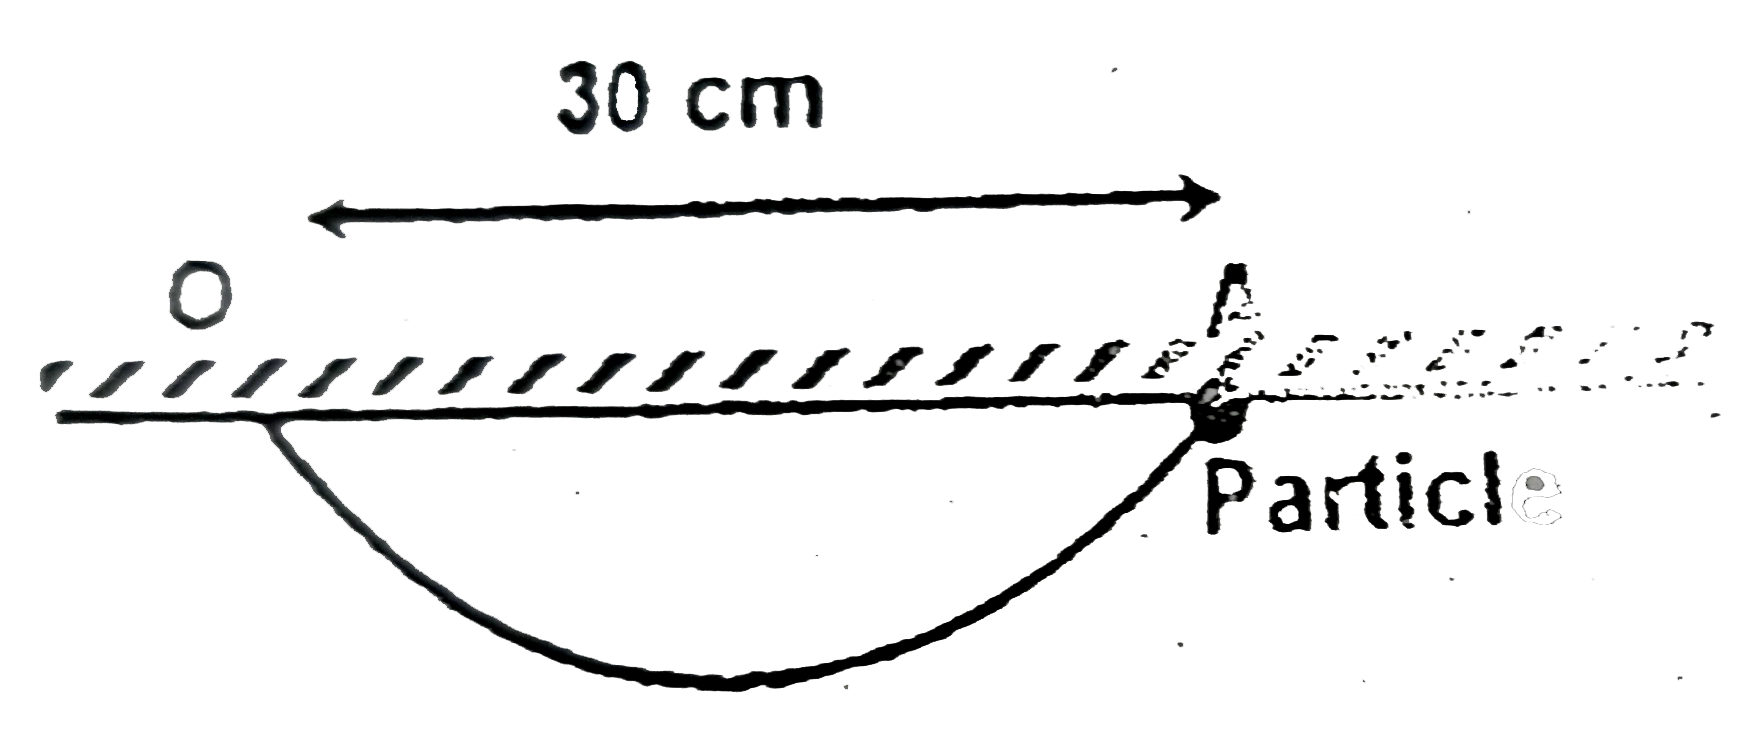 A small ball of mass 100 g is attached to a light and inextensible string of length 50 cm. The string is tied to a support O and the mass m released from point A which is a' a horizontal distance of 30cm from the support. Calculate the speed of the ball is its lowest point of the trajectory.